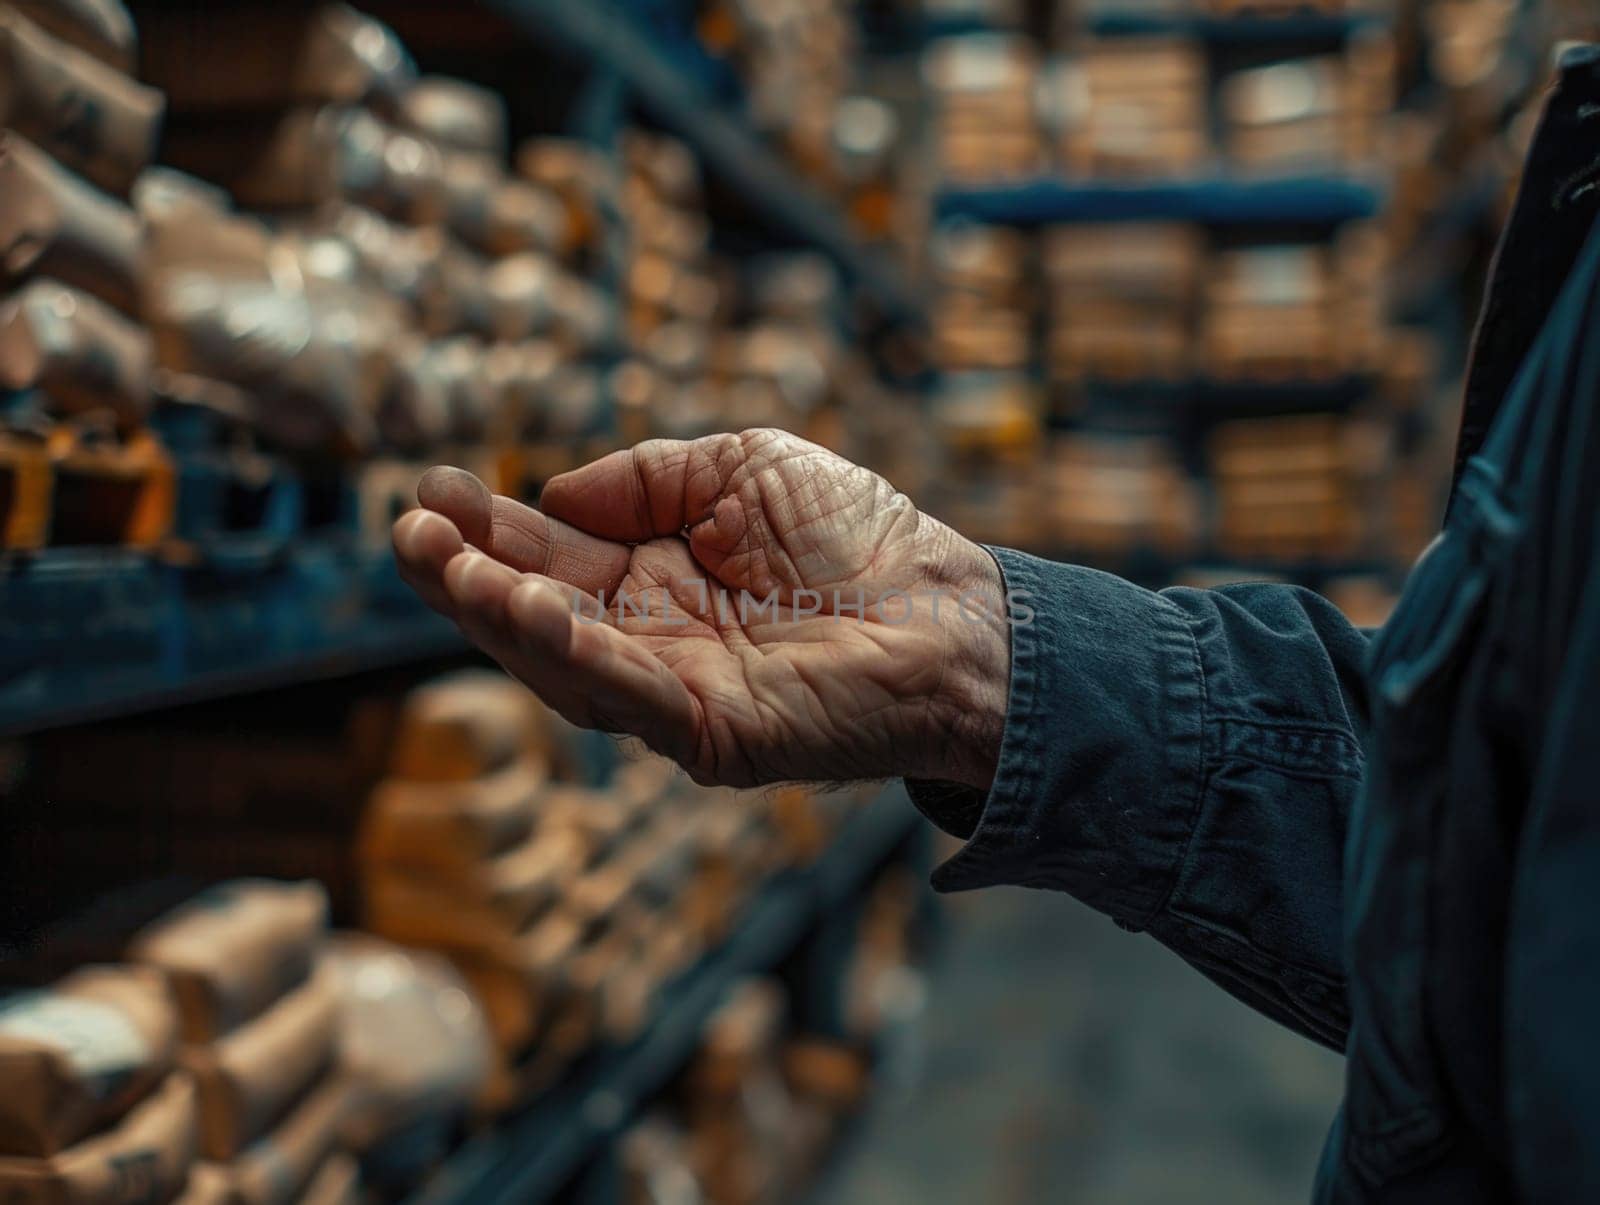 Close-Up Handshake Offer in a Warehouse Setting by but_photo